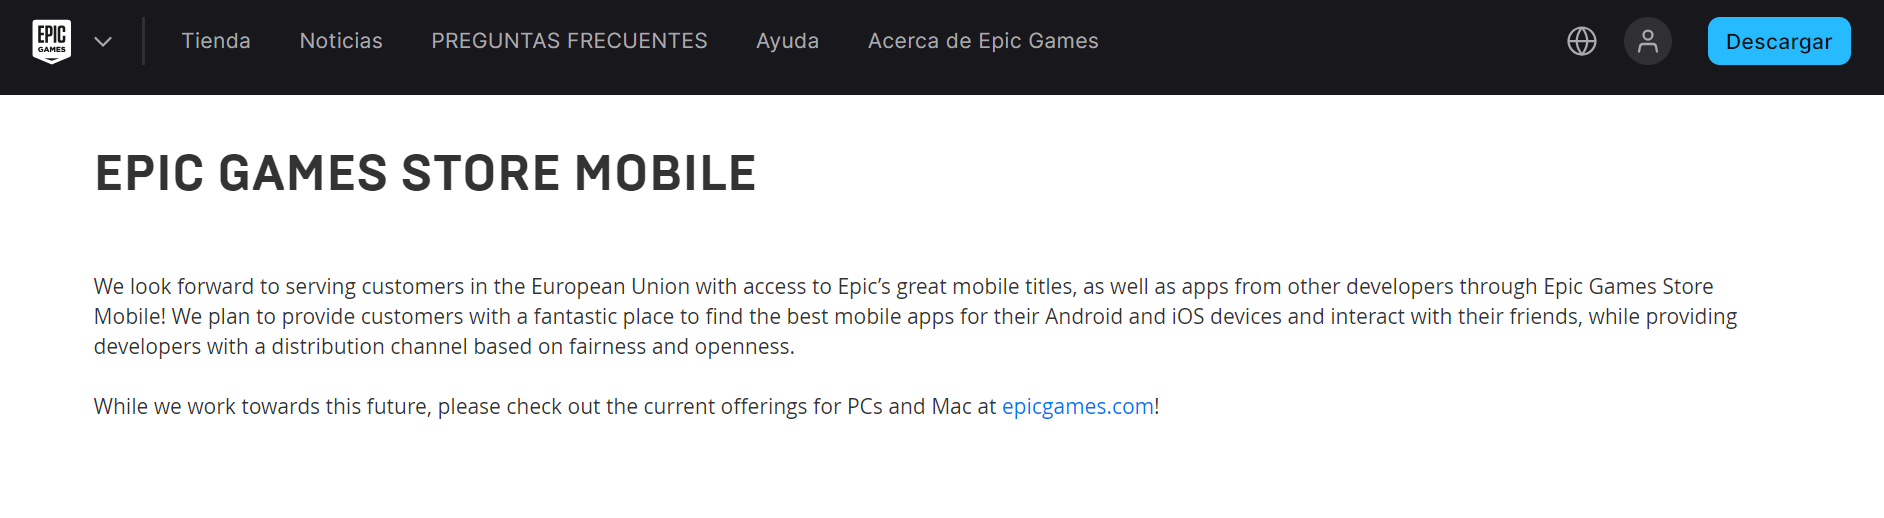 Epic Game Store Mobiel voor Android